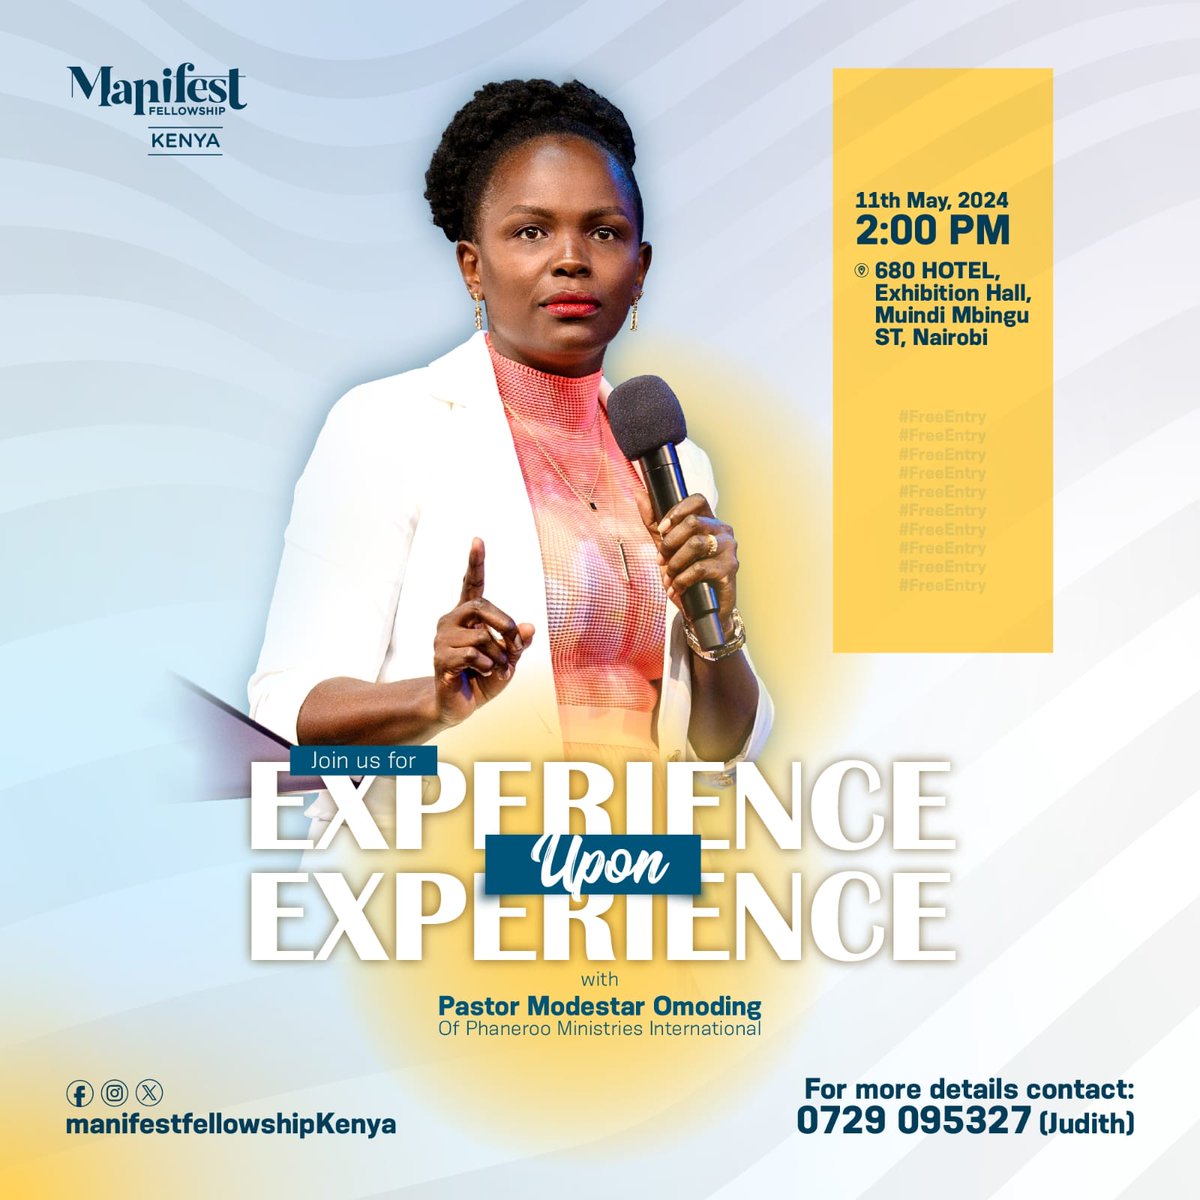 Manifest Fellowship Kenya invites you to a conference themed Experience Upon Experience with Pastor Modestar Omoding of Phaneroo Ministries International on Saturday, 11th May 2024 at 680 Hotel (Exhibition Hall), Nairobi from 2pm.

#ExperienceUponExperience
#BringAFriend